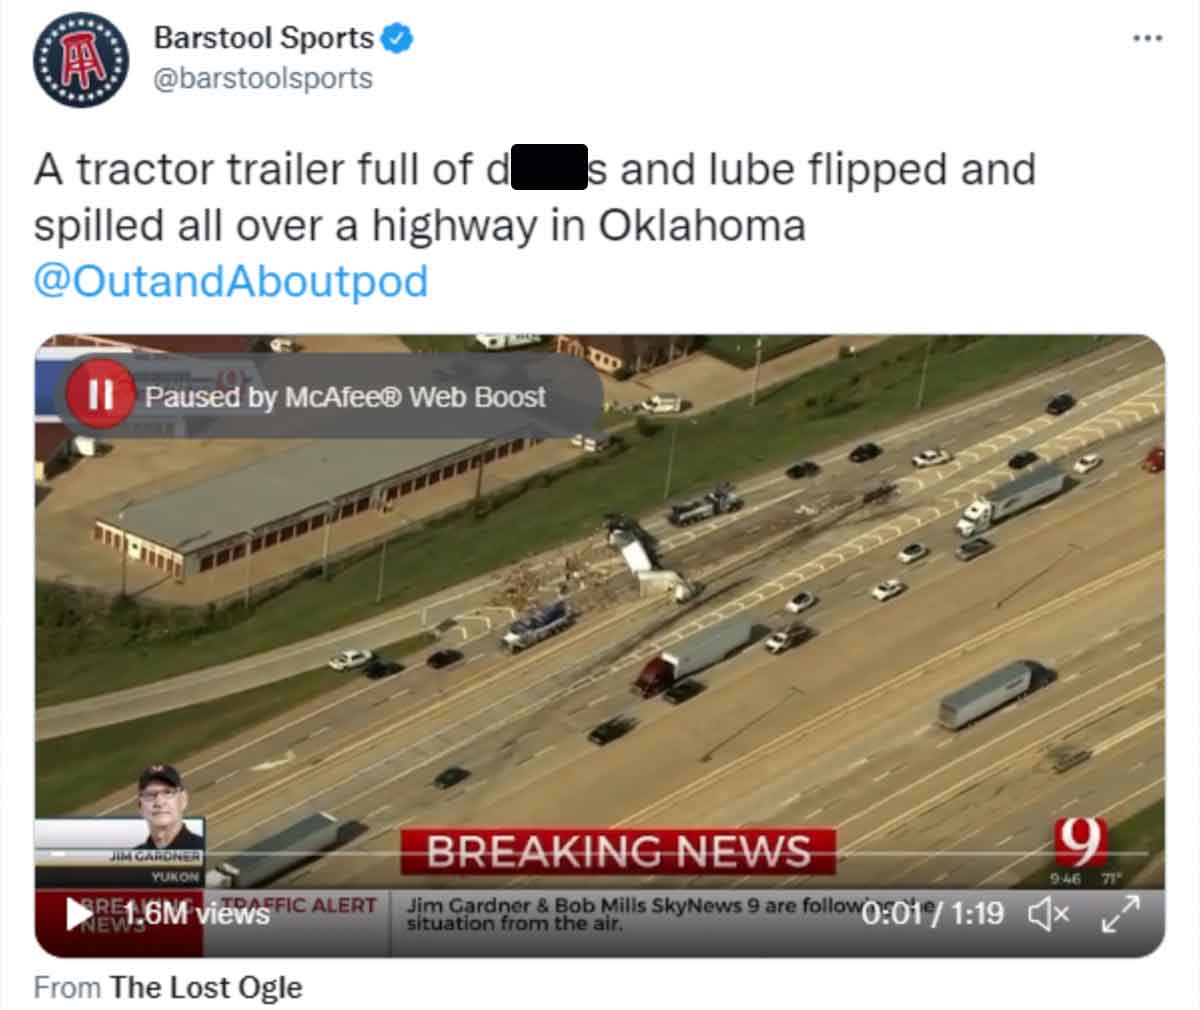 screenshot - Barstool Sports A tractor trailer full of d s and lube flipped and spilled all over a highway in Oklahoma Paused by McAfee Web Boost 44 Yukon 1.6M views Fic Alert From The Lost Ogle Breaking News 946 71